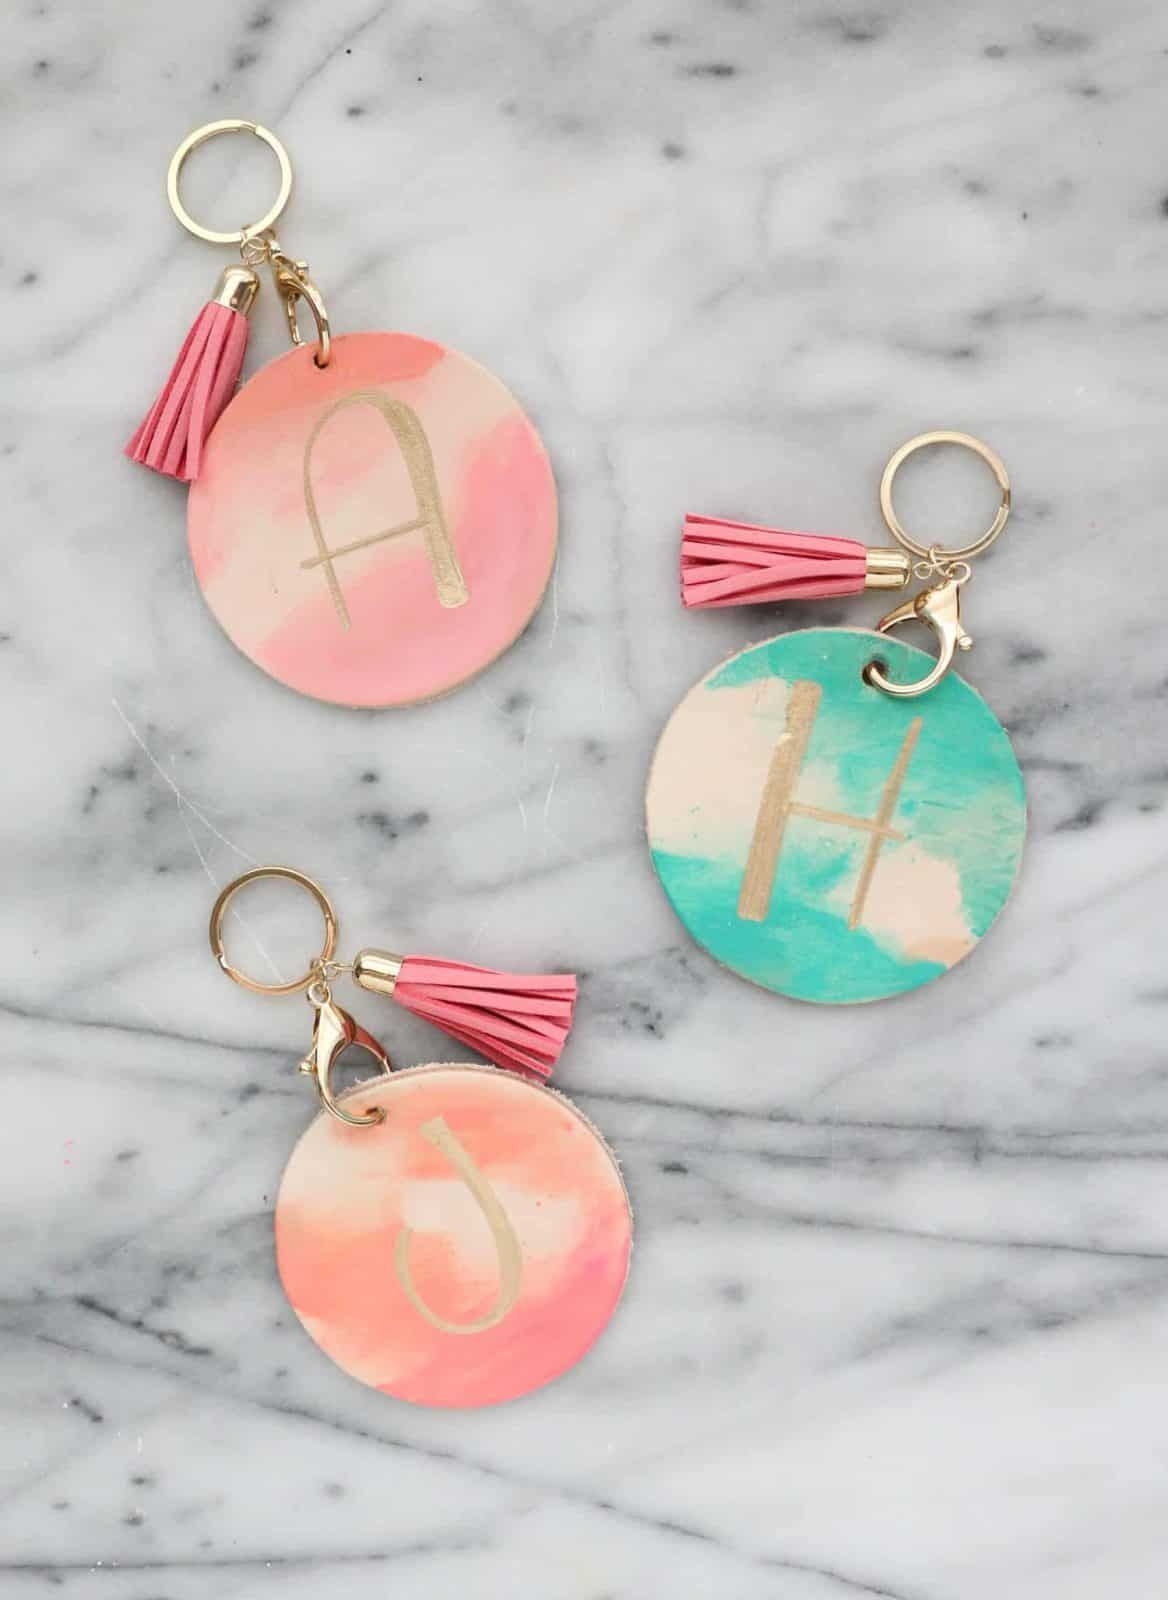 13 diy Gifts just because ideas